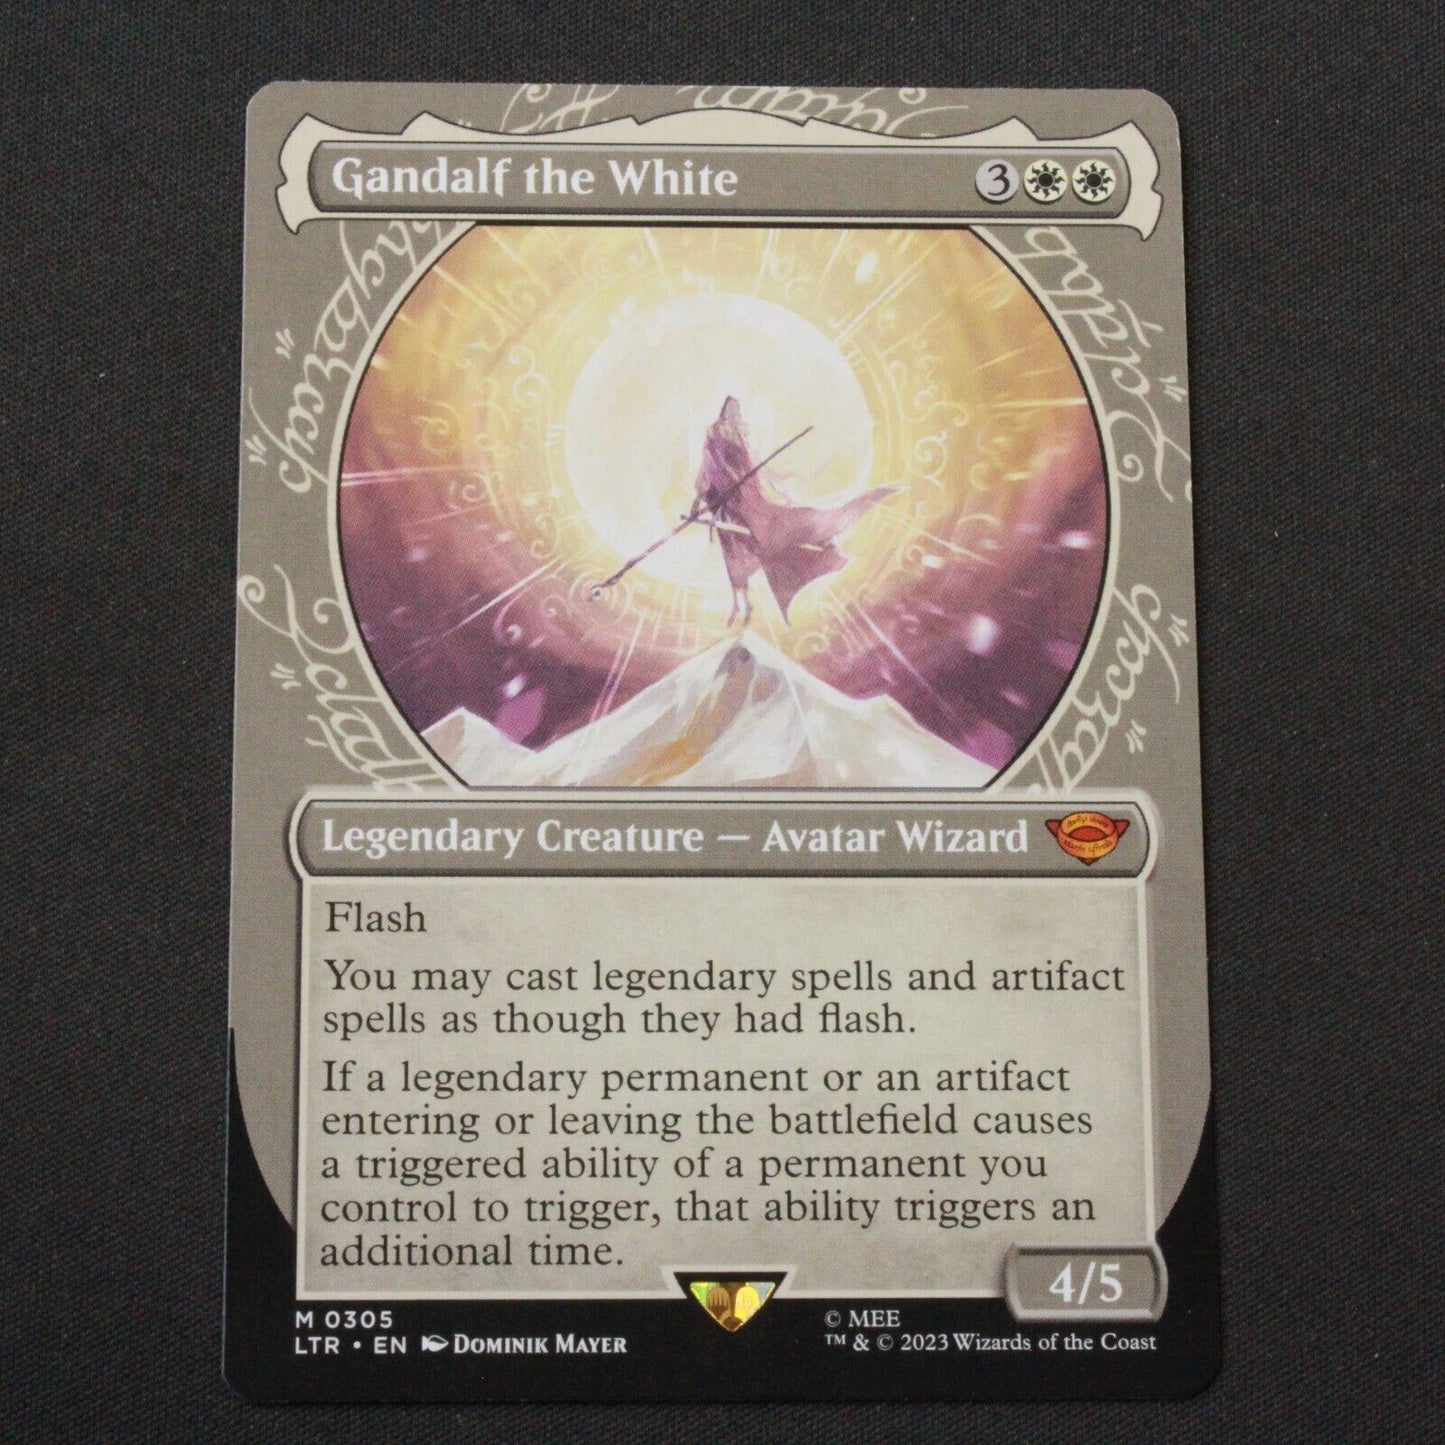 MTG Lord of the Rings (LTR) Mythic Gandalf the White (Showcase) 305 NM